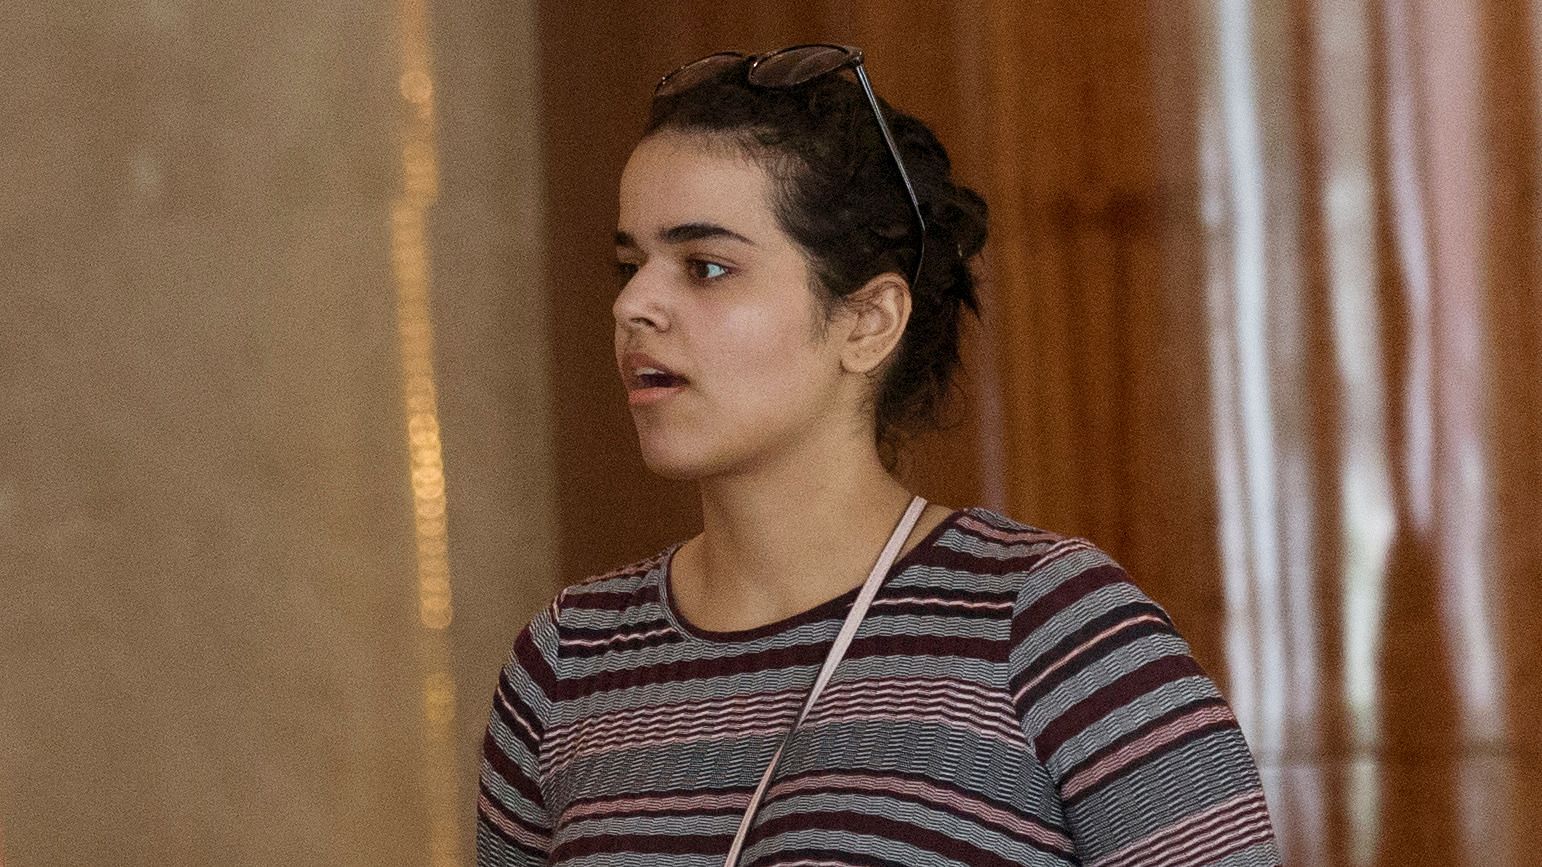 Rahaf Mohammed al-Qunun had fled her family to seek asylum alleging abuse by her family.